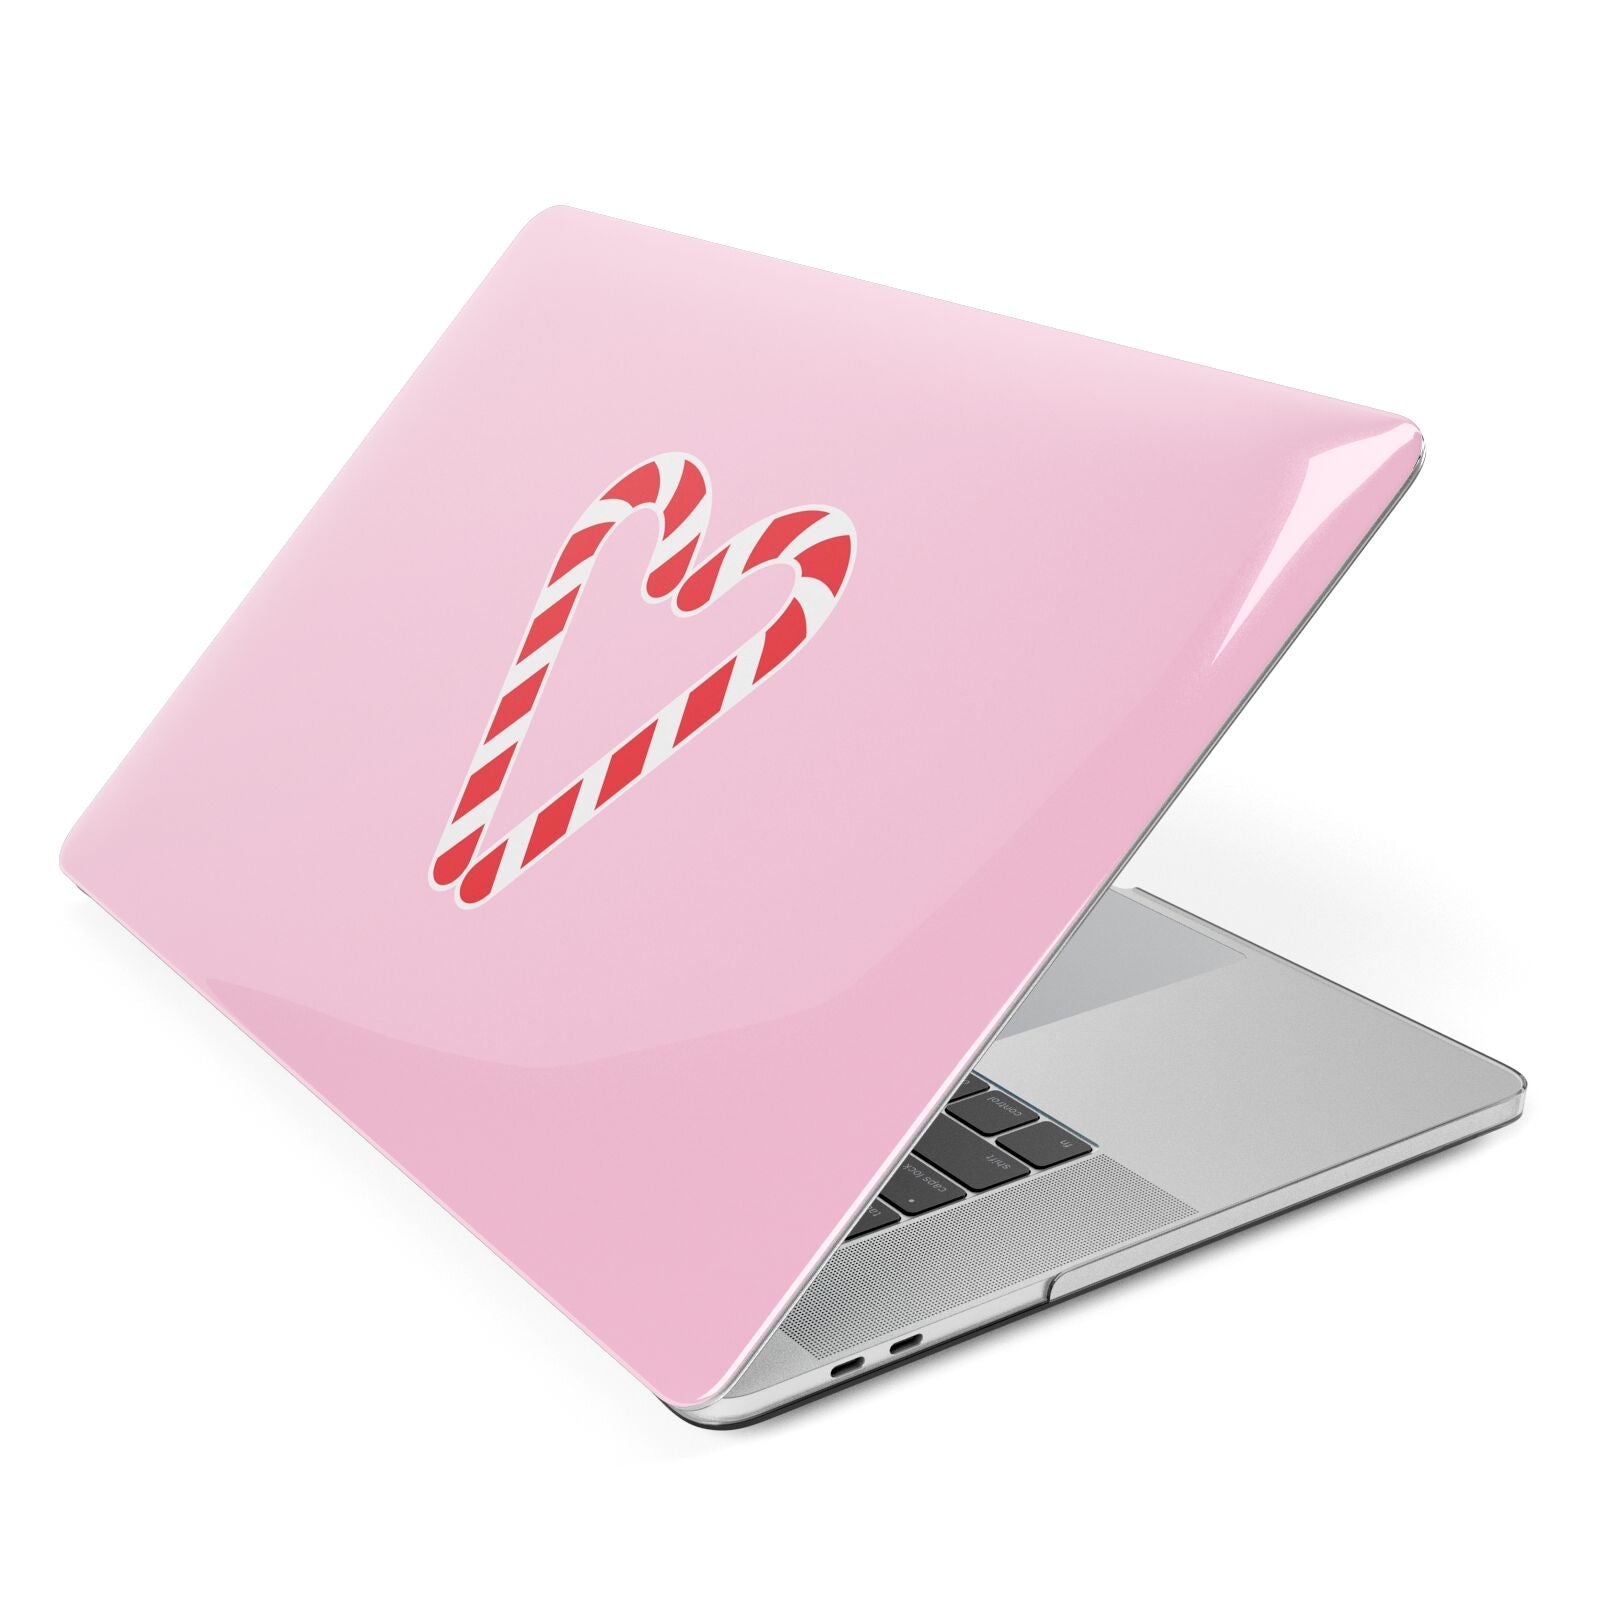 Candy Cane Heart Apple MacBook Case Side View